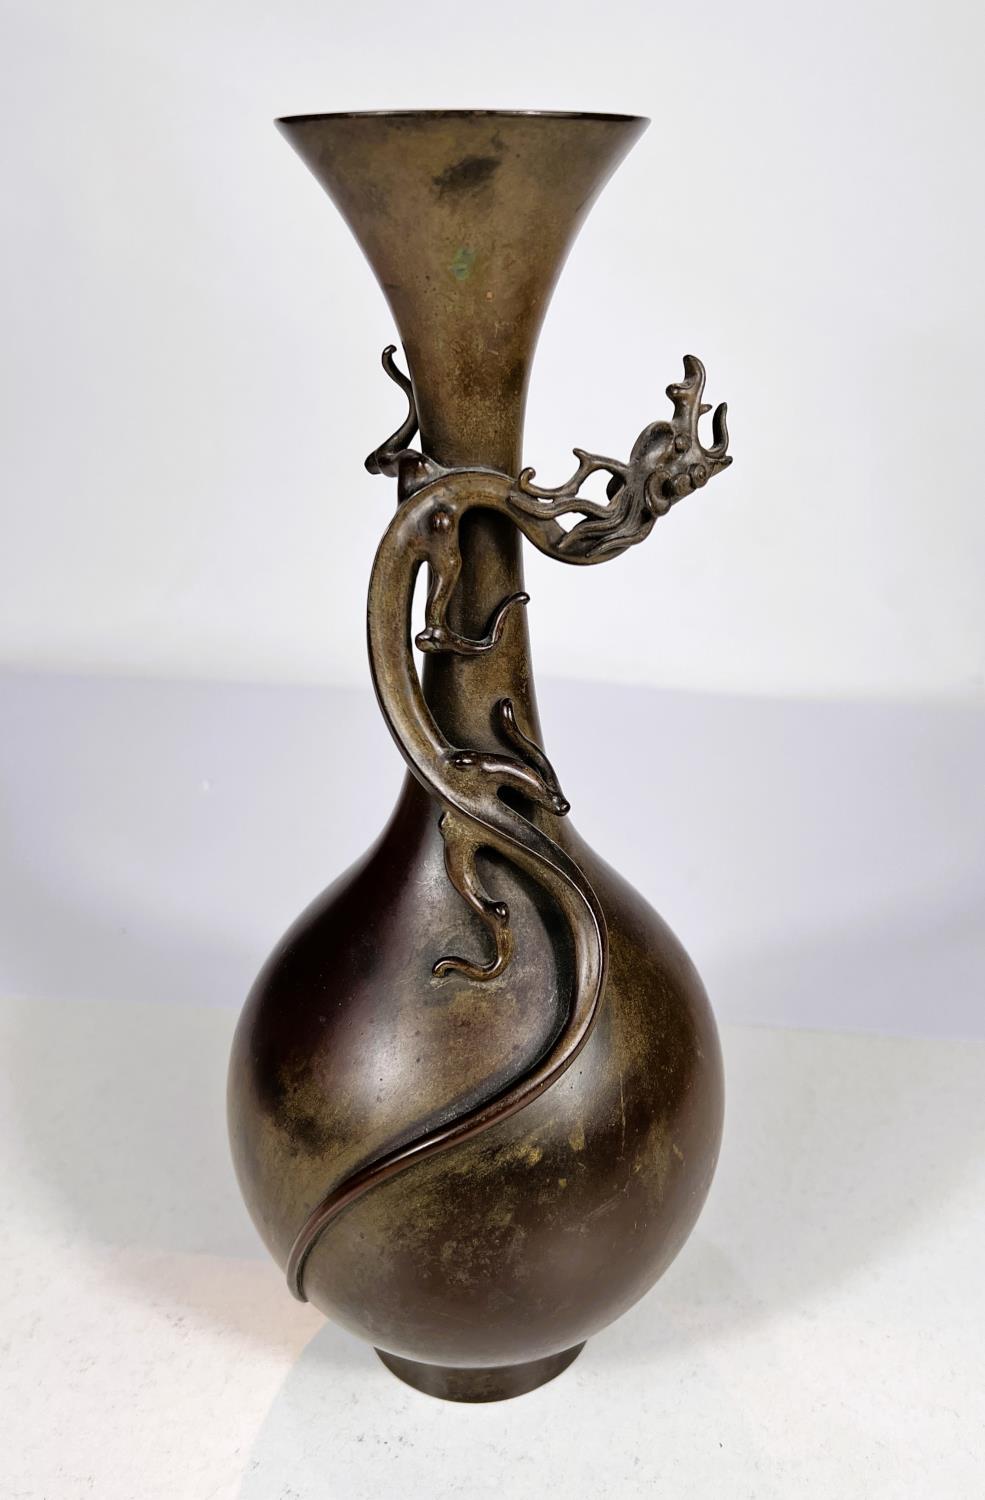 A Japanese Meiji period bronze vase with relief dragon climbing around the neck of vase, with etched